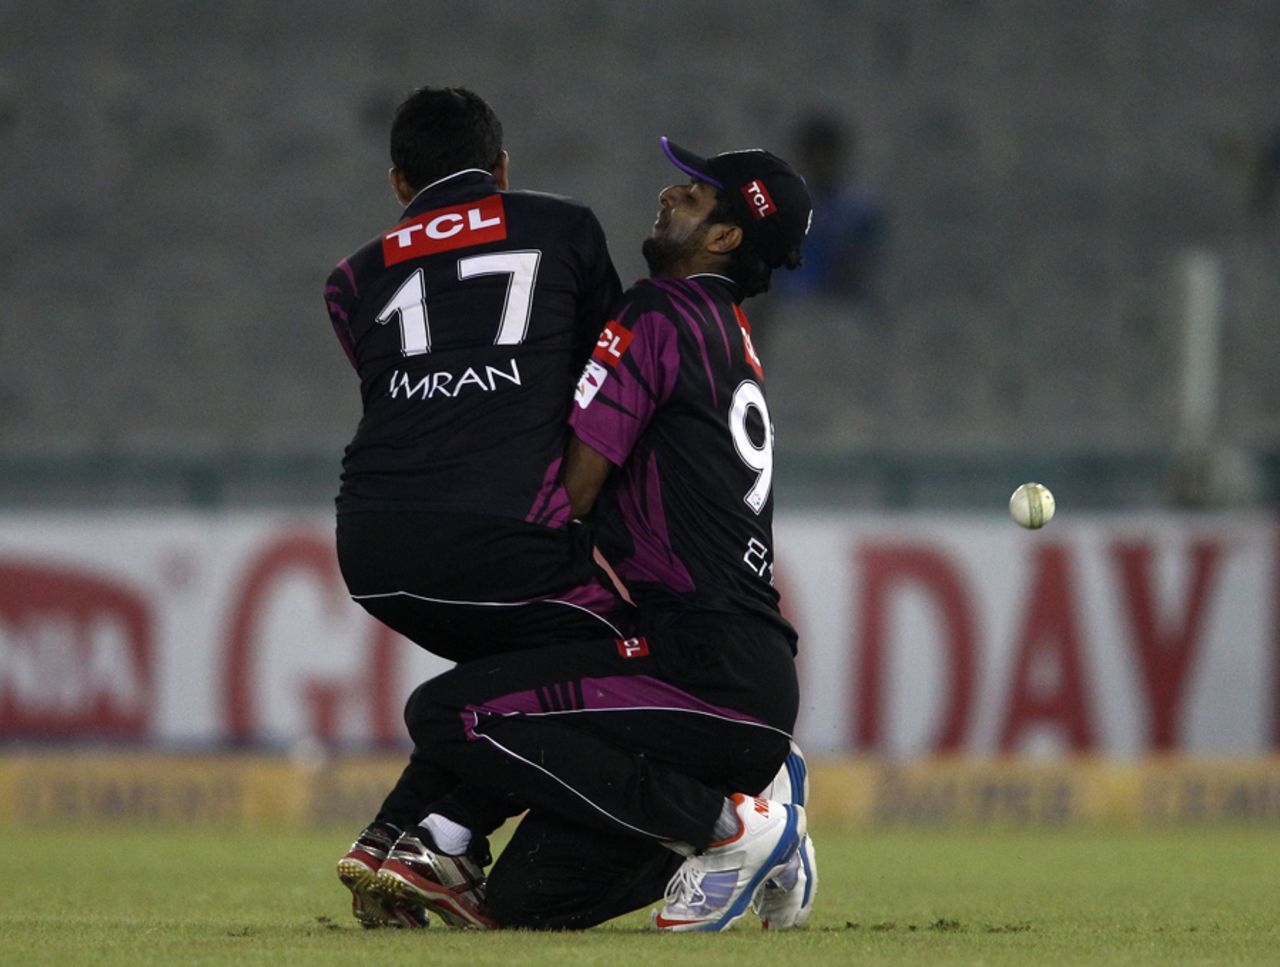 Imran Khalid and Ehsan Adil collided while attempting a catch, Faisalabad Wolves v Kandurata Maroons, Champions League Qualifiers, Mohali, September 20, 2013